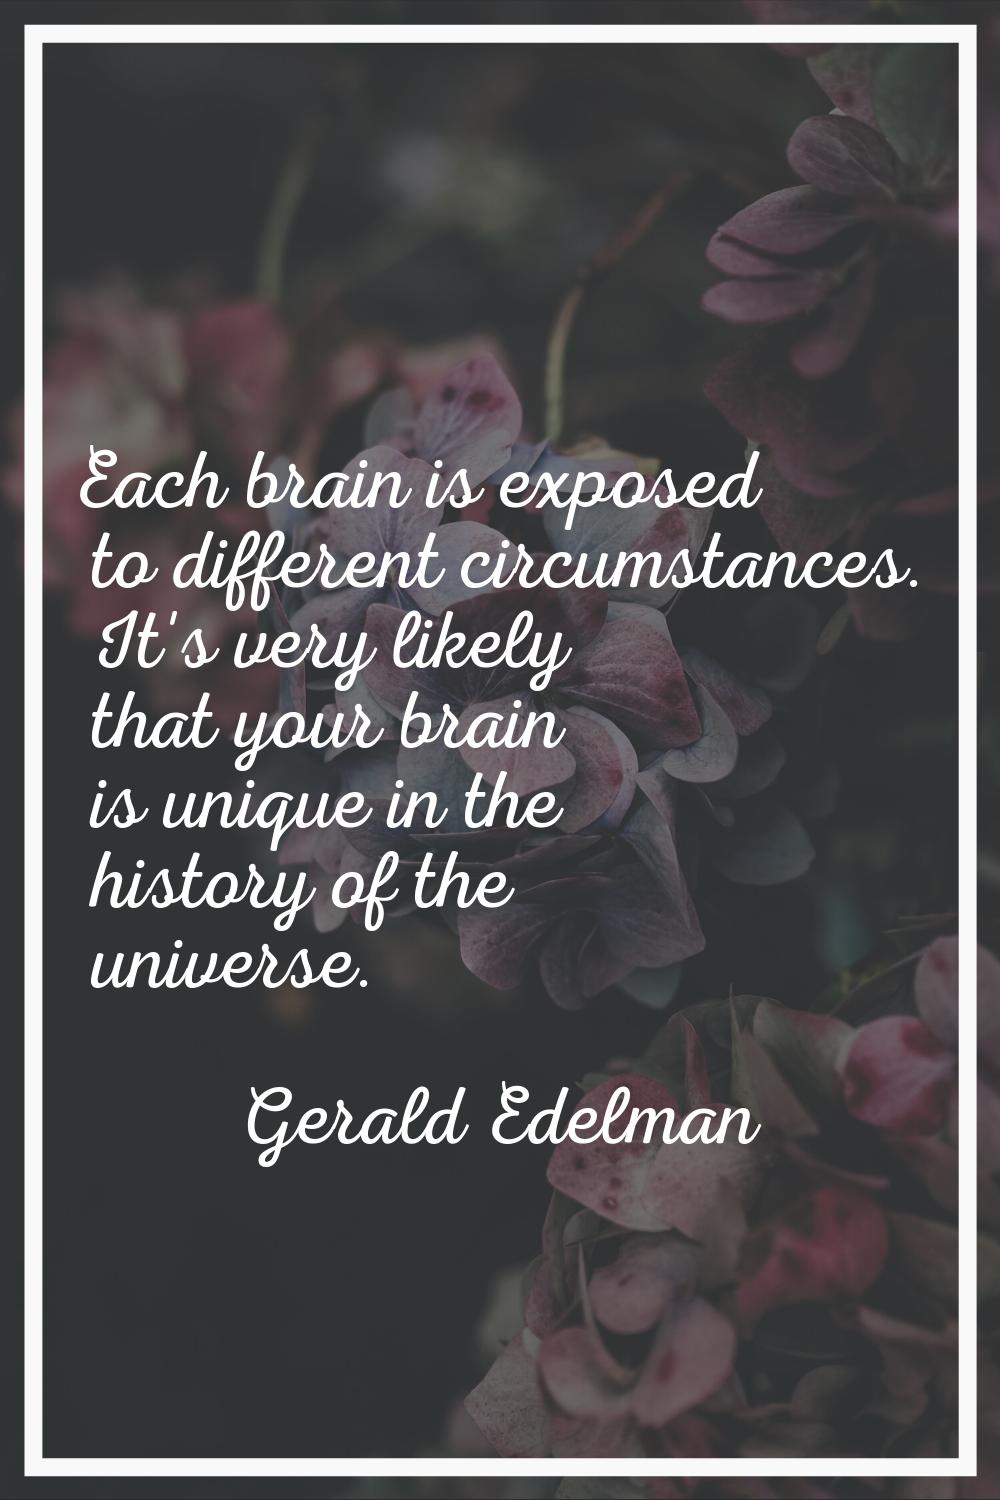 Each brain is exposed to different circumstances. It's very likely that your brain is unique in the